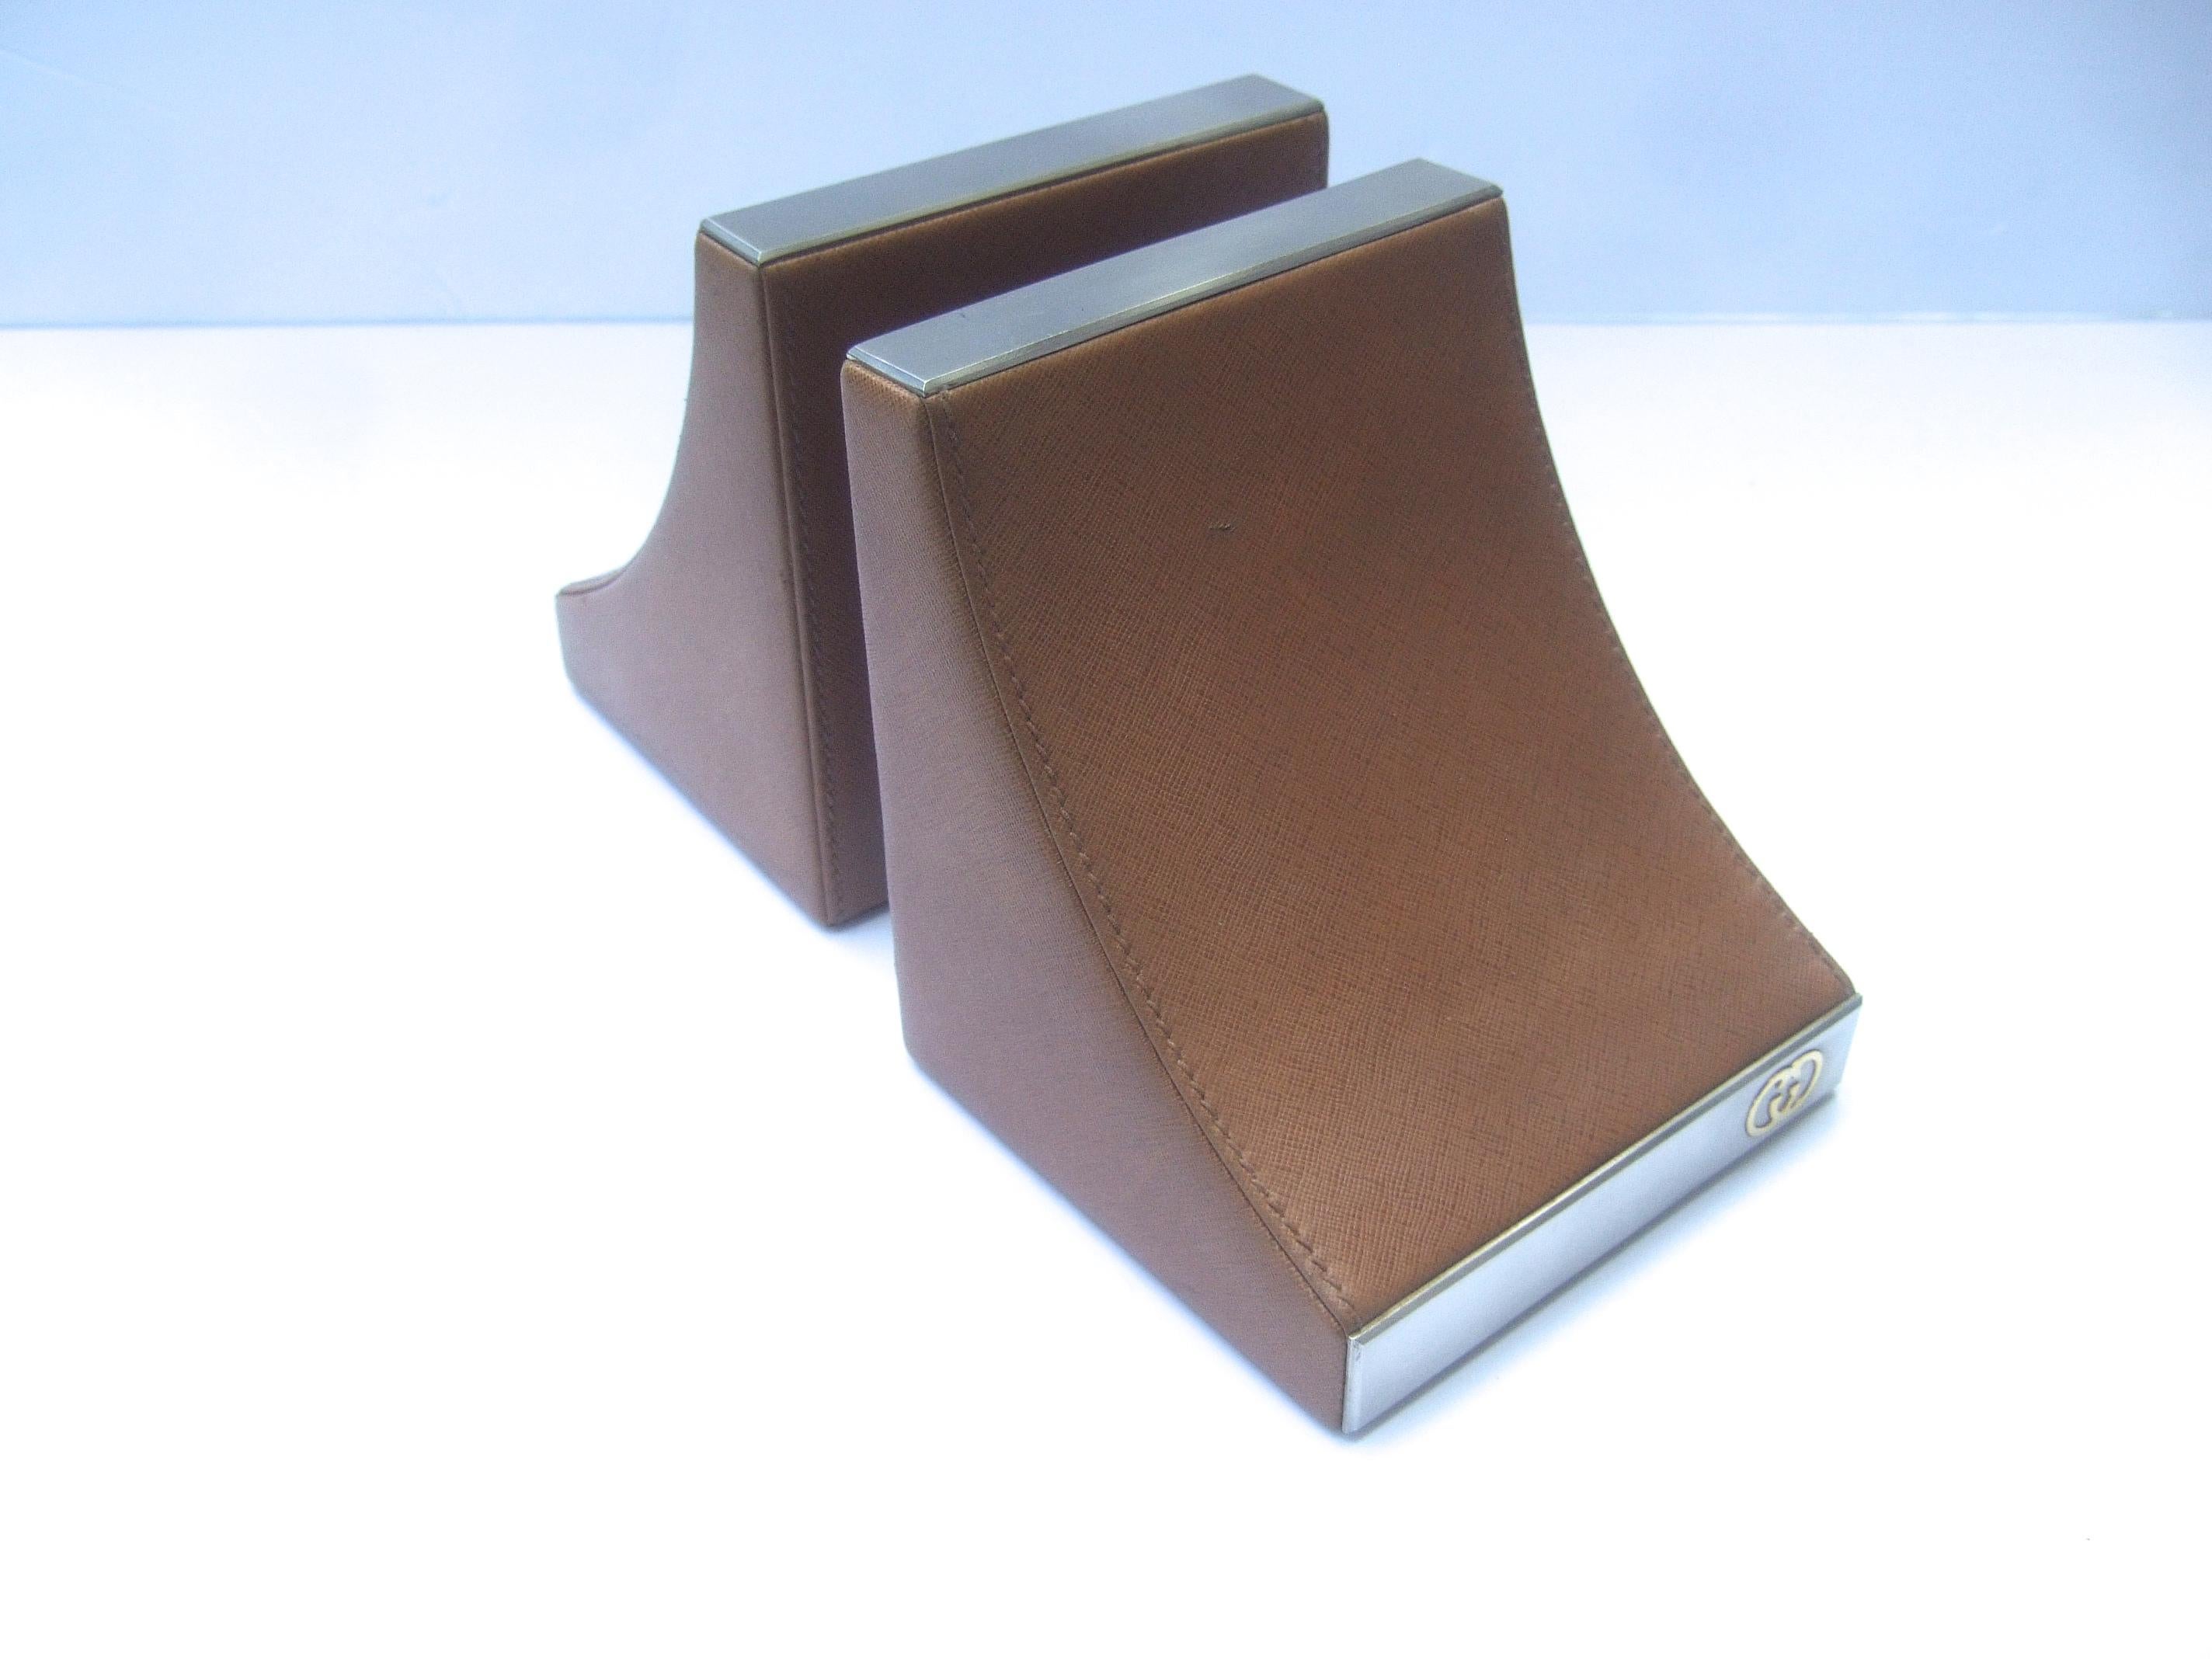 Gucci Italy Rare Caramel Brown Leather Pair of Bookends c 1970s  4